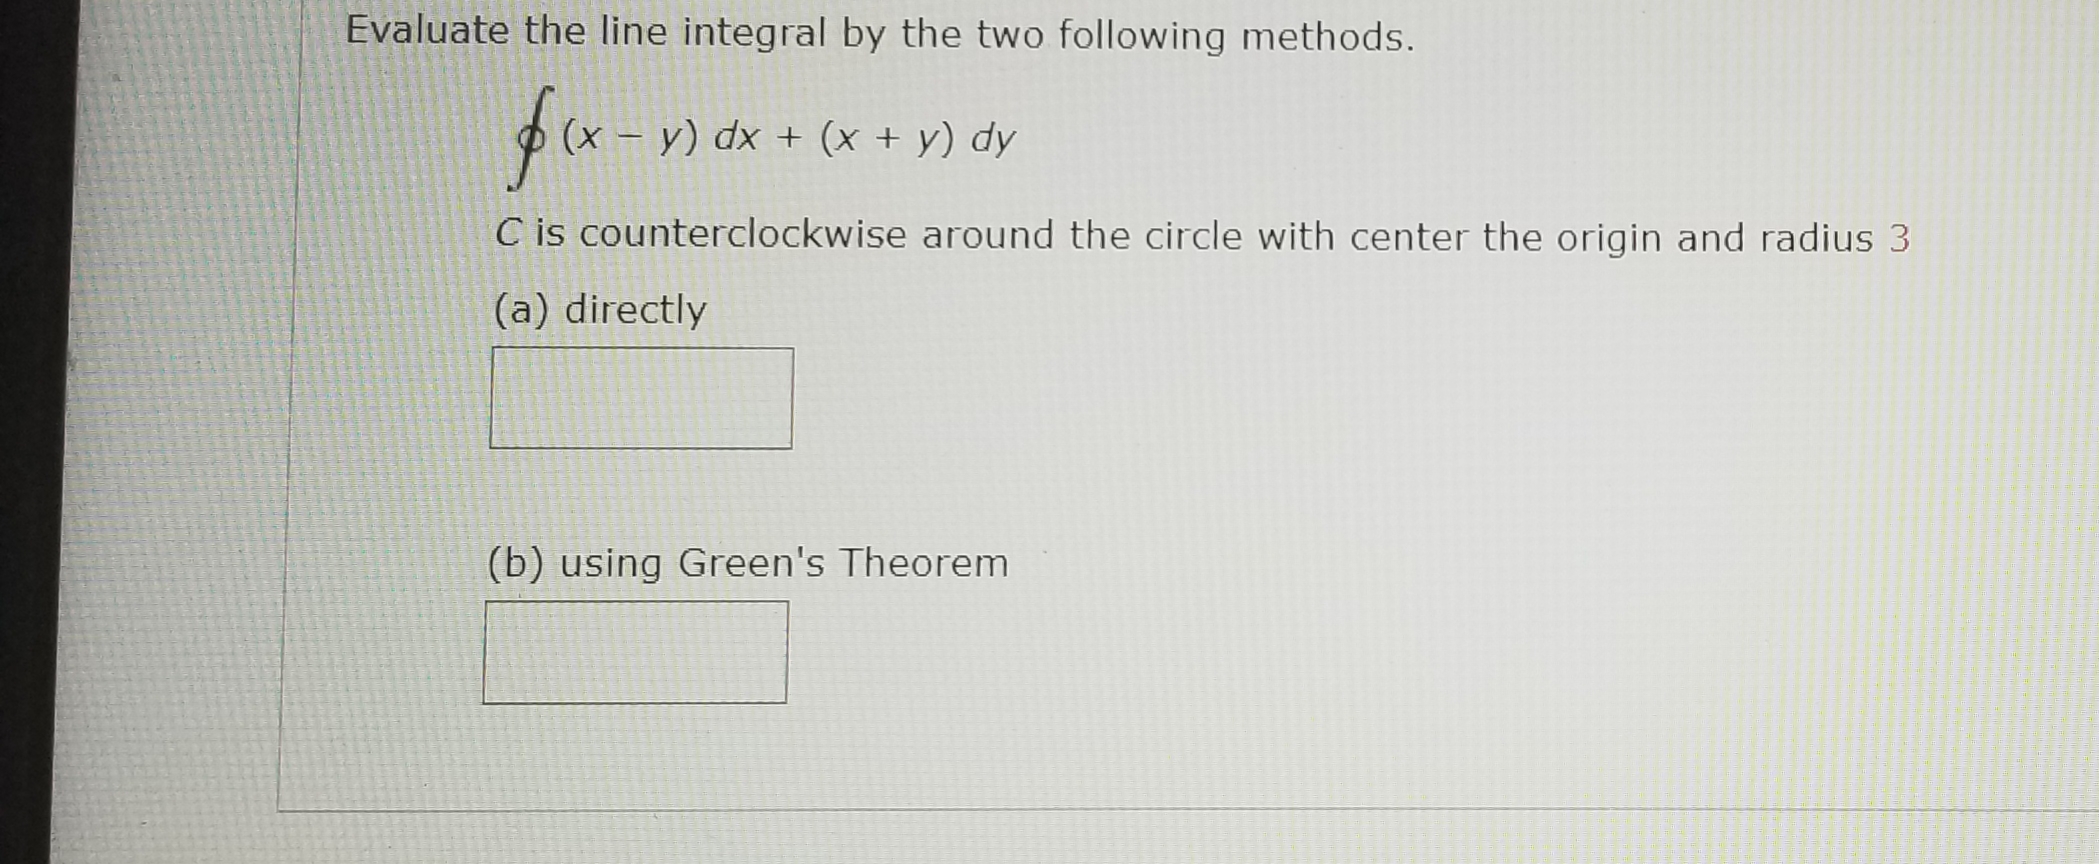 Evaluate the line integral by the two following methods.
y) dx + (x + y) dy
C is counterclockwise around the circle with center the origin and radius 3
(a) directly
(b) using Green's Theorem
